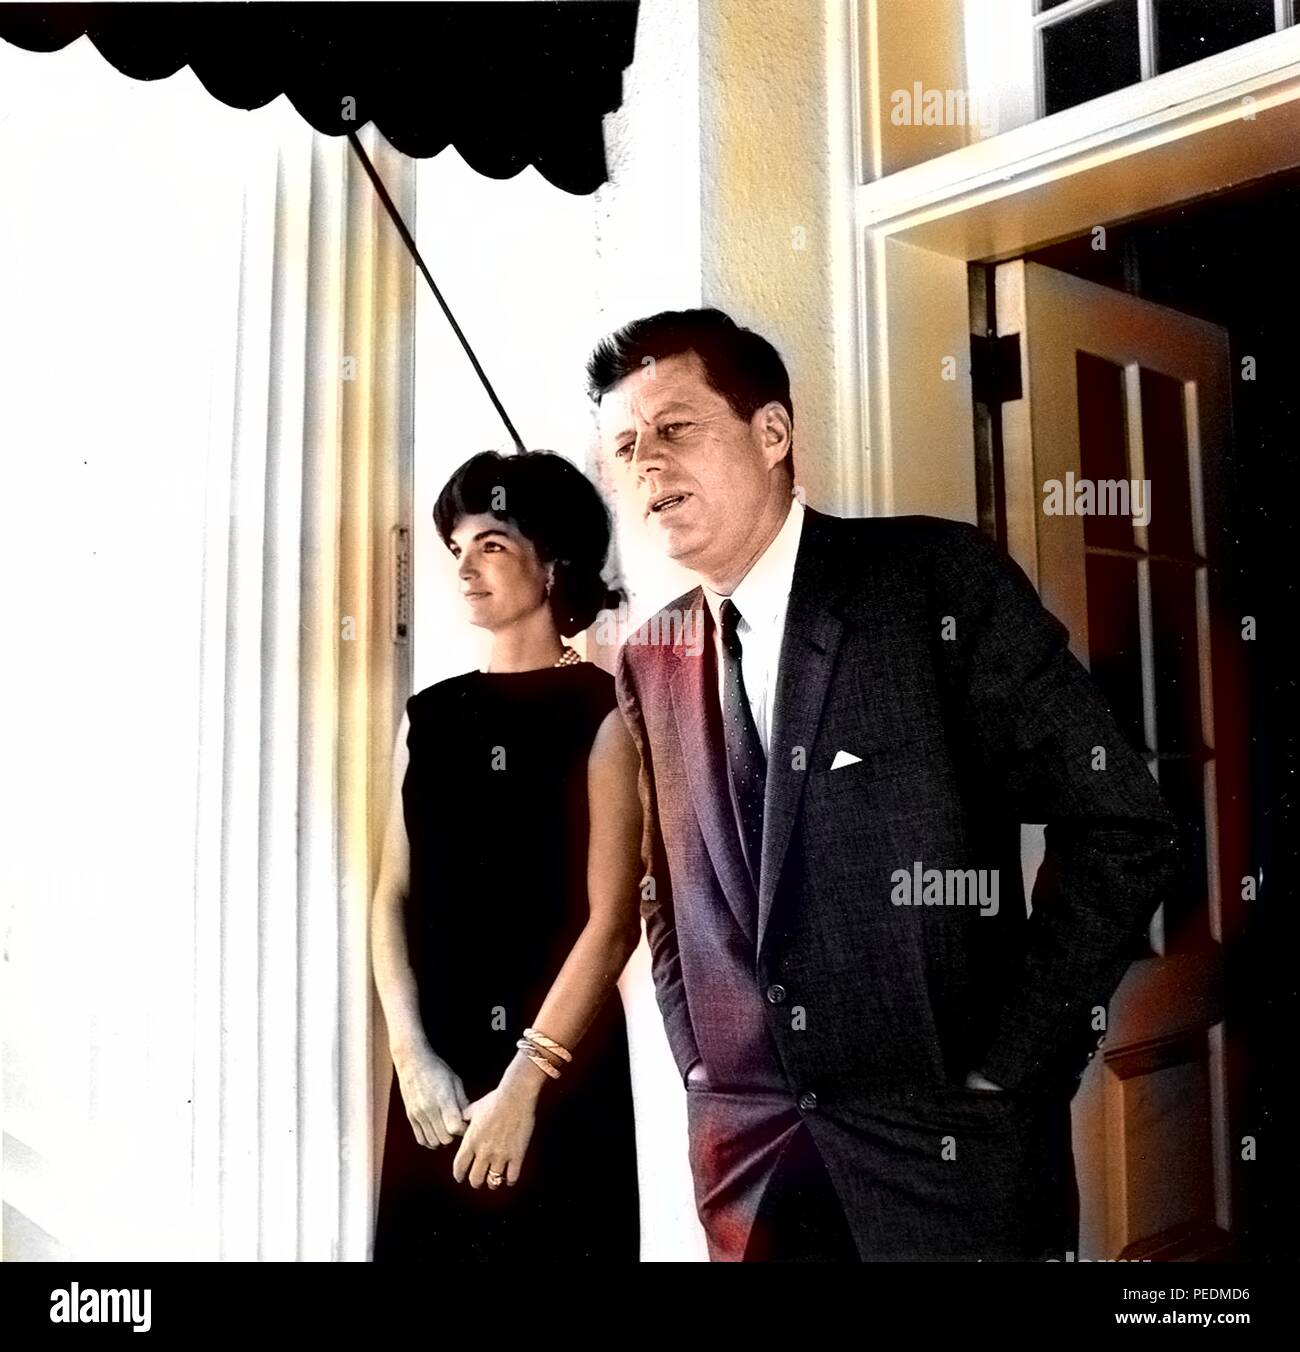 John F Kennedy and Jacqueline Kennedy stand together as they exit through a door at the White House, 1963. Note: Image has been digitally colorized using a modern process. Colors may not be period-accurate. () Stock Photo